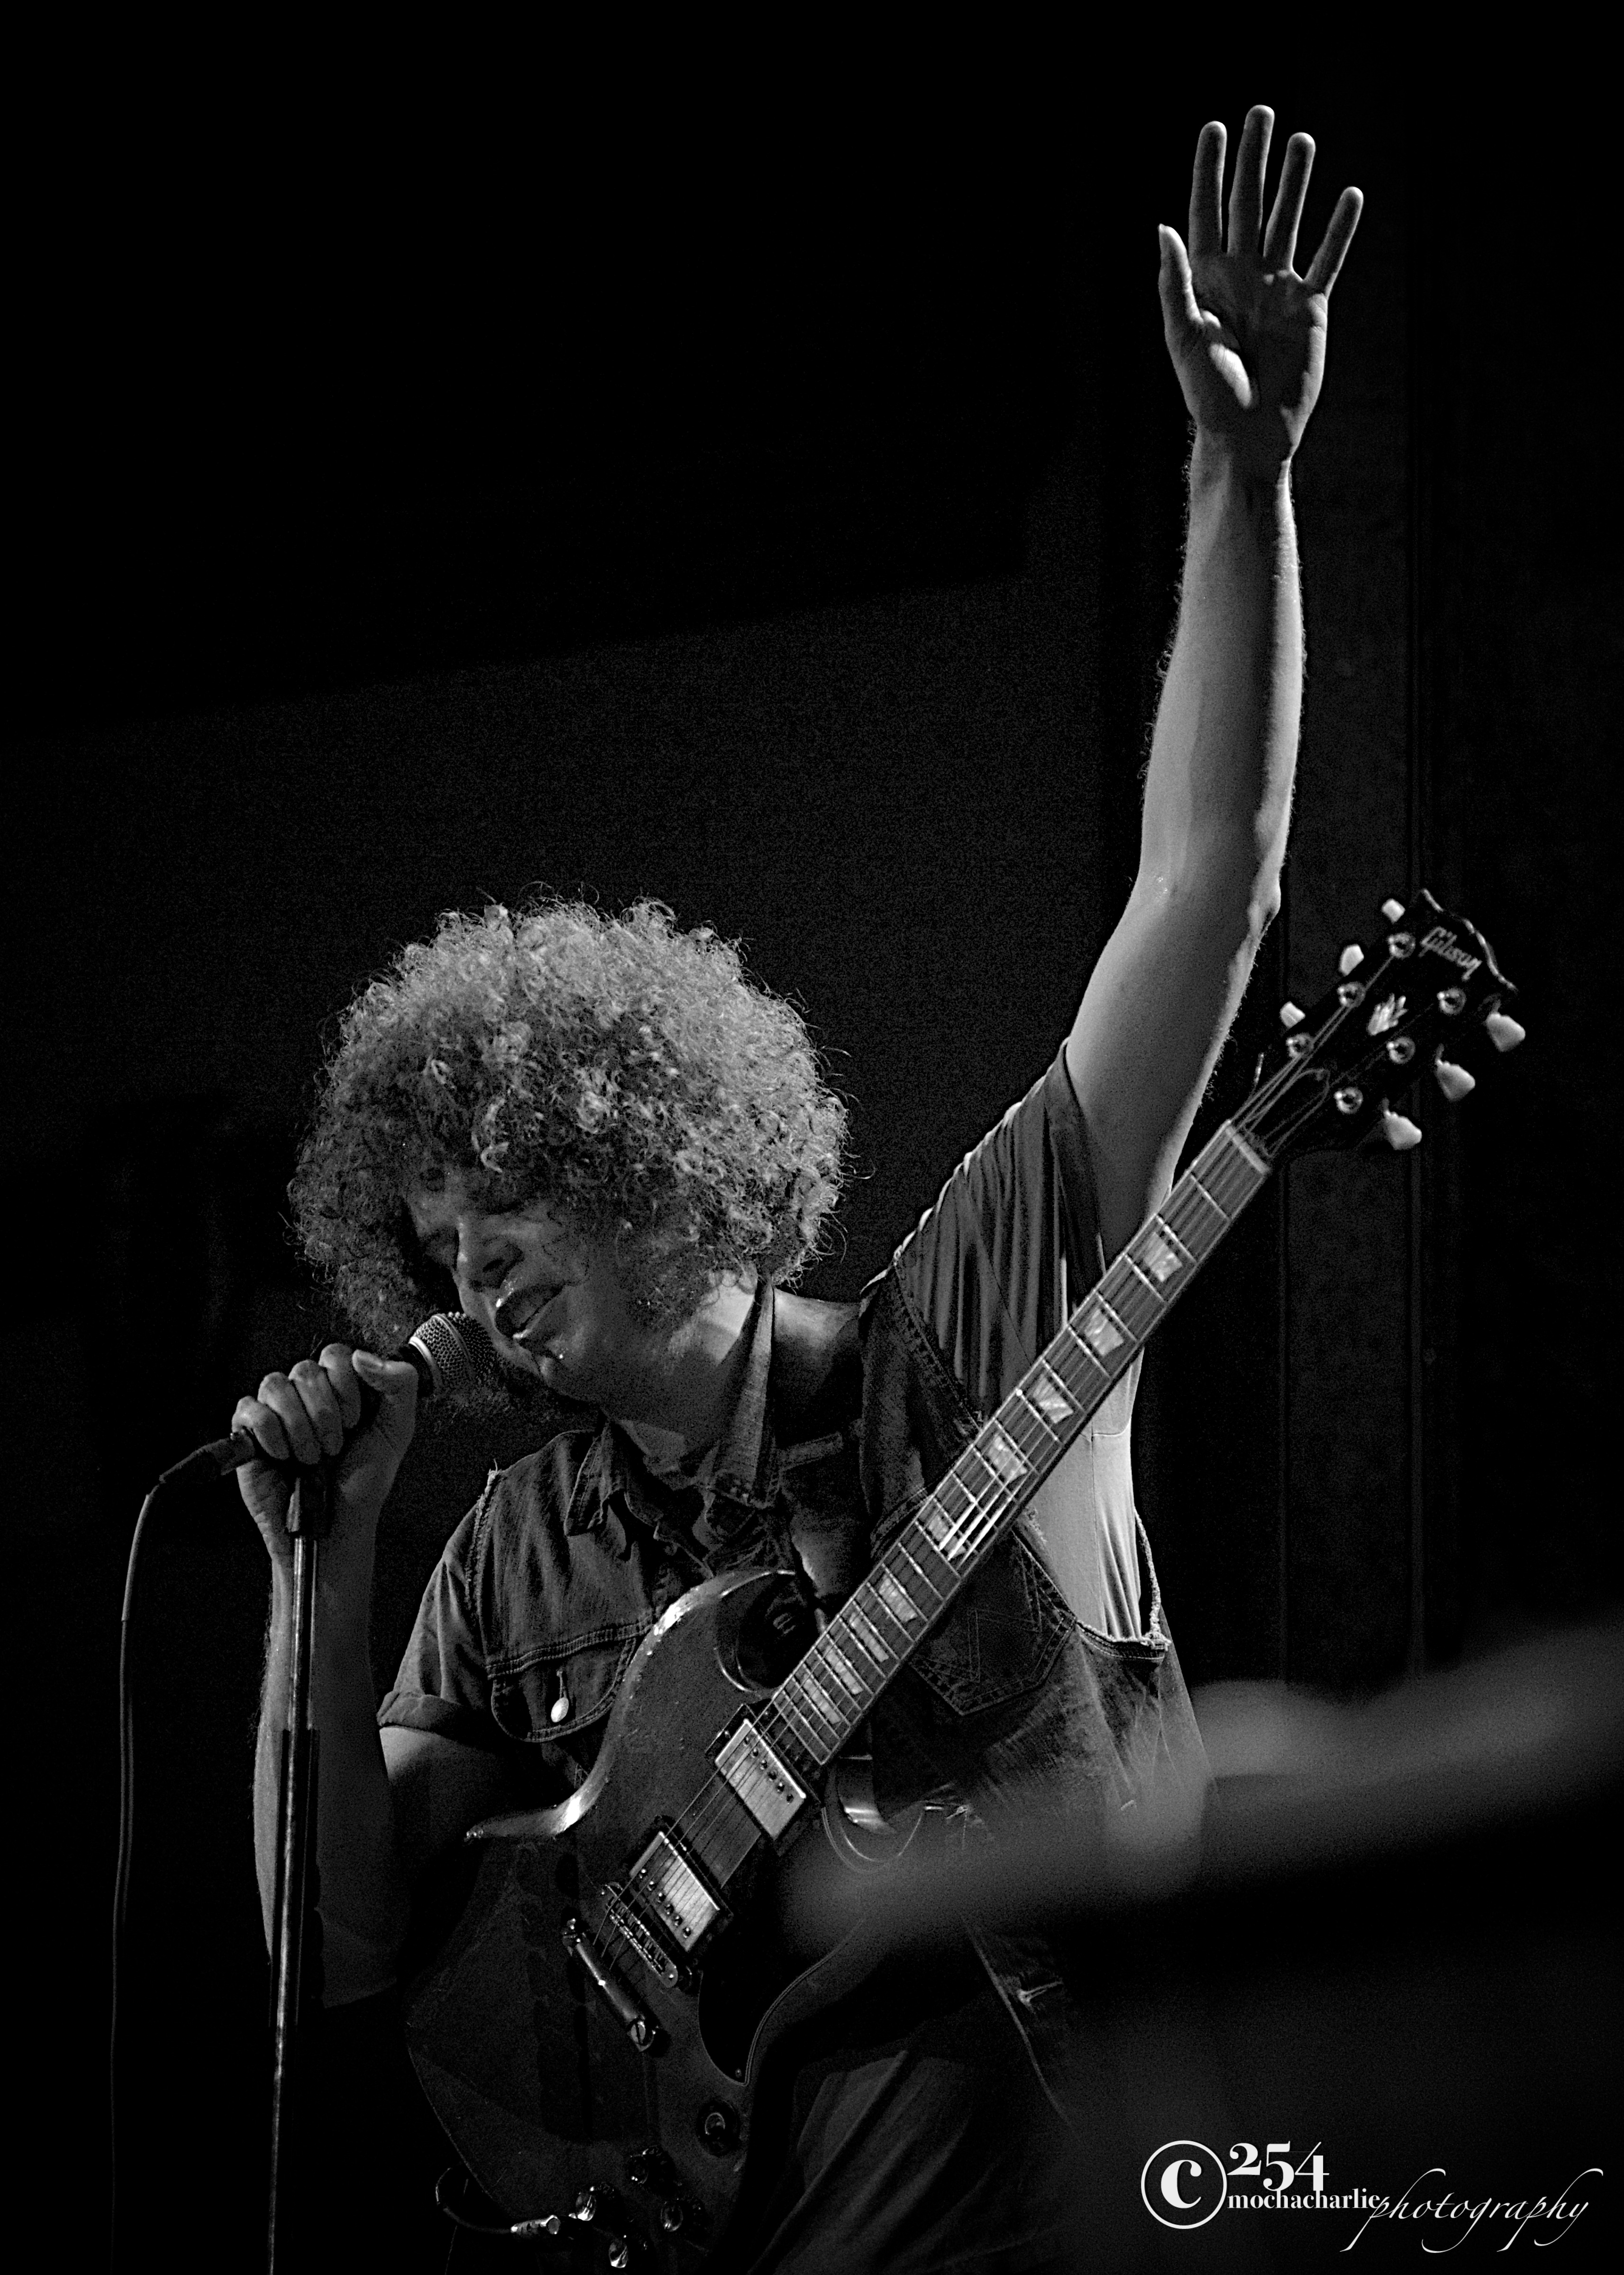 Wolfmother at The Neptune (Photo by Mocha Charlie)